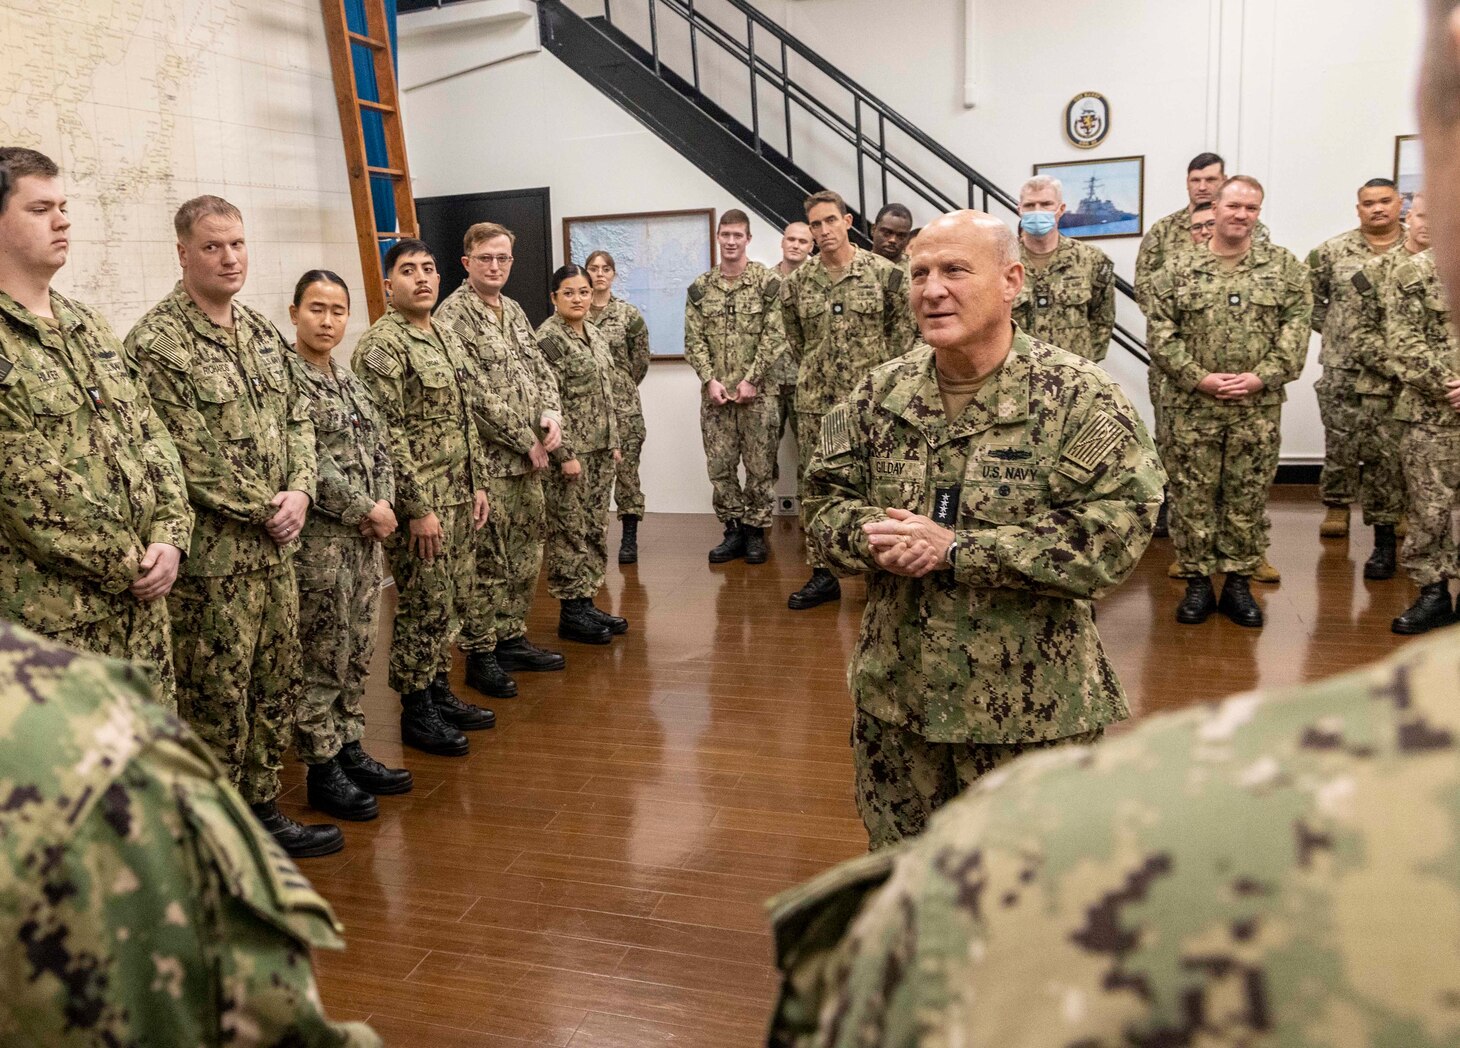 YOKOSUKA, Japan (Nov. 7, 2022) Chief of Naval Operations (CNO) Adm. Mike Gilday addresses Sailors assigned to Arleigh Burke-class guided-missile destroyers USS Barry (DDG 52), USS Milius (DDG 69) and USS Ralph Johnson (DDG 114) and Sailors assigned to Commander, Task Force (CTF) 71 after a group reenlistment at the CTF 71 command cave, in Yokosuka, Japan, Nov. 7. Commander, Task Force 71/Destroyer Squadron (DESRON) 15 is the Navy’s largest forward-deployed DESRON and the U.S. 7th Fleet’s principal surface force. (U.S. Navy photo by Mass Communication Specialist 1st Class Deanna C. Gonzales)